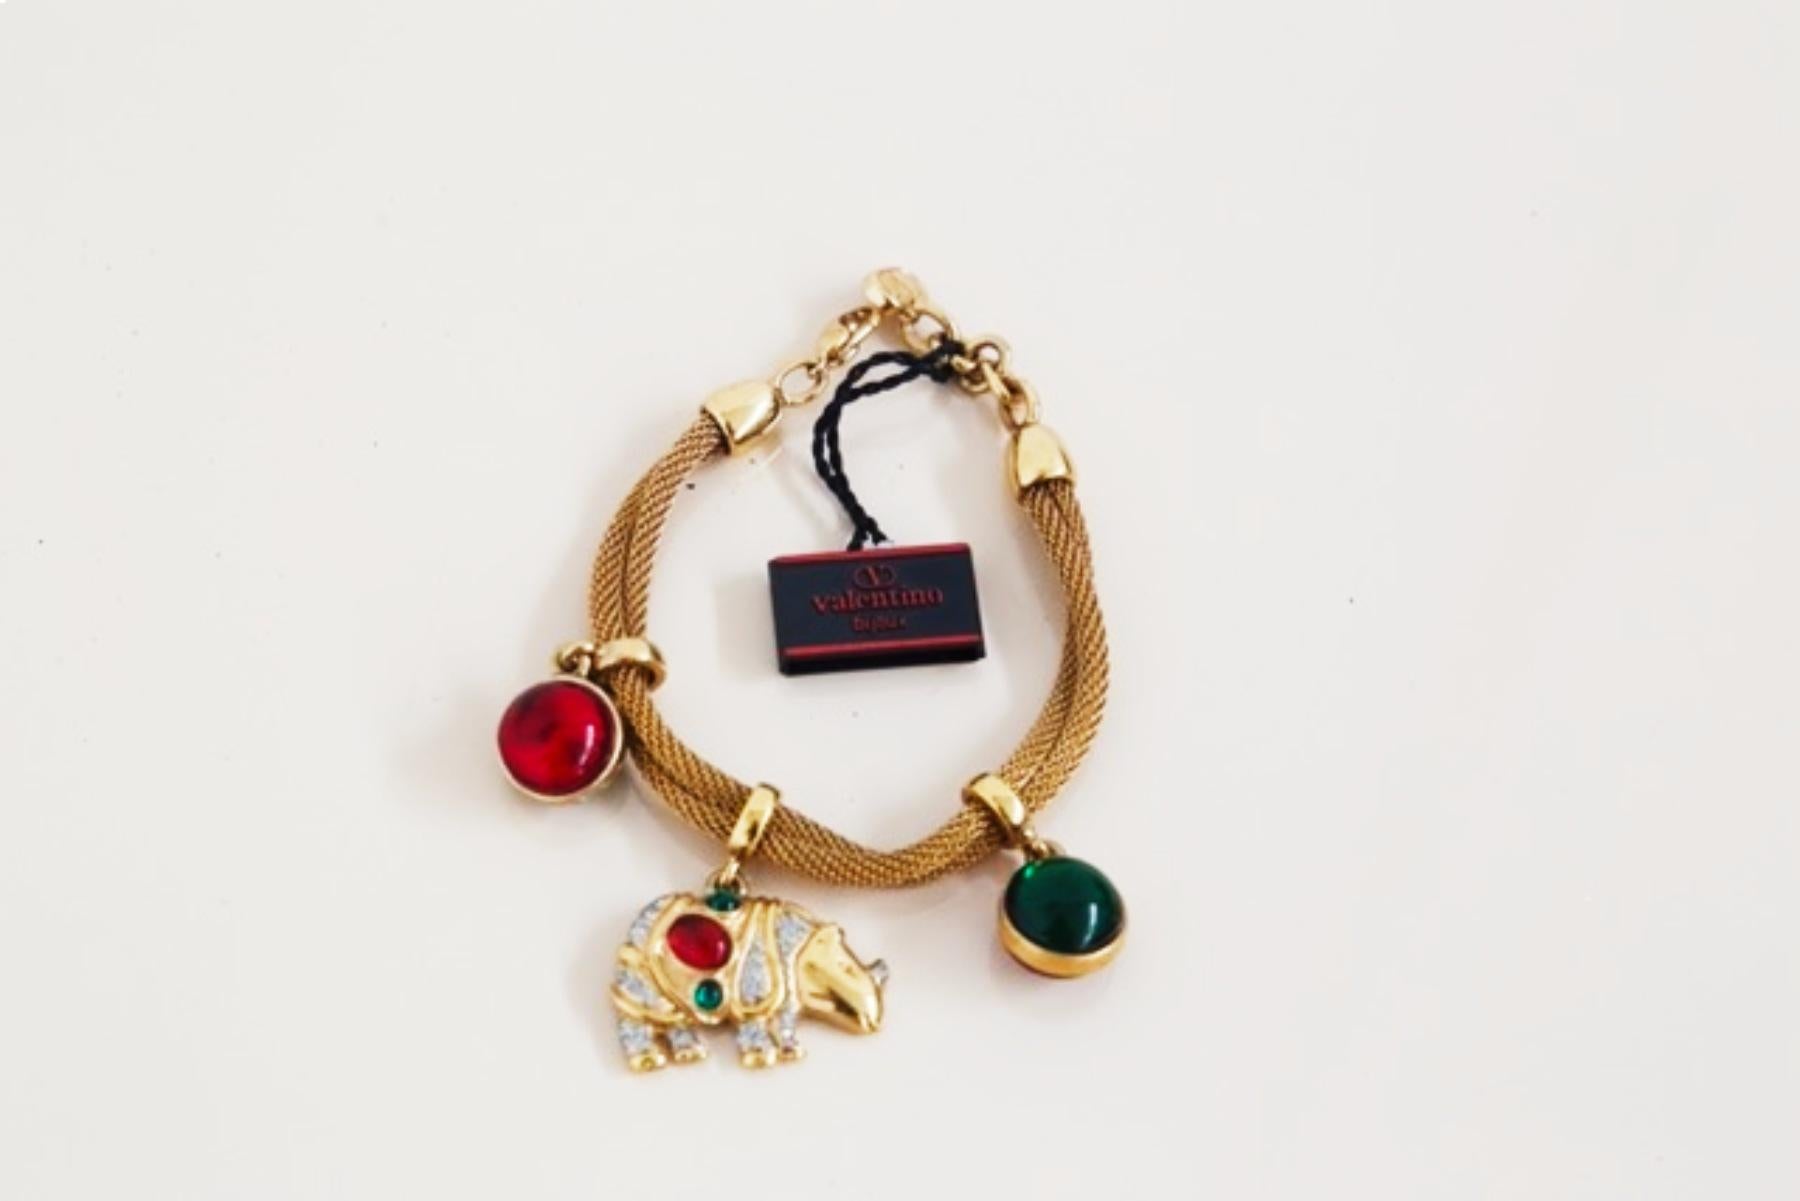 Valentino Vintage Bracelet in Gold with Stones For Sale 1